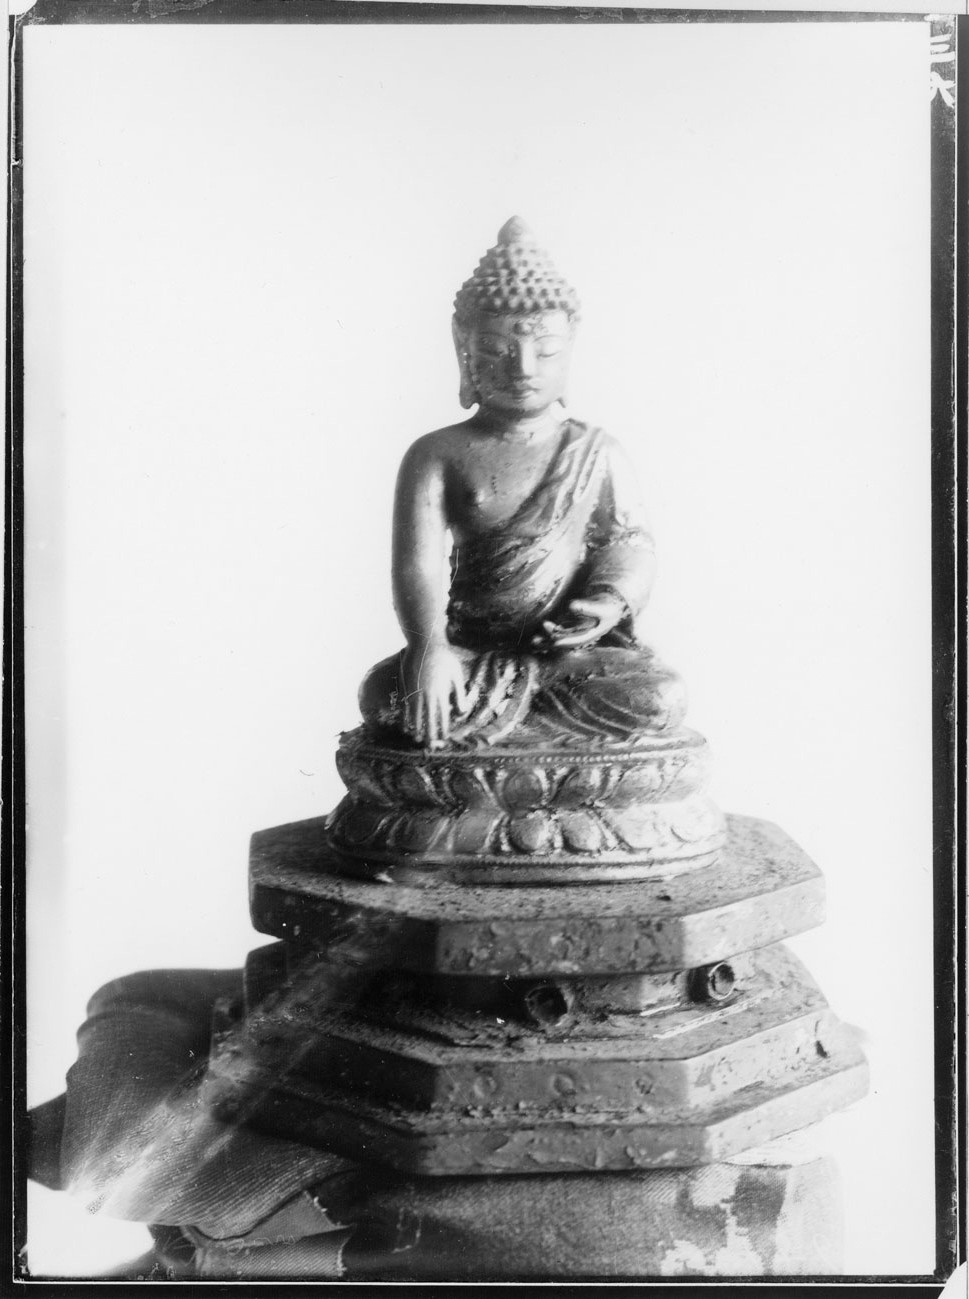 <i>Great Master Songun’s Personal Buddha from Nakseo-am hermitage at Geonbong-sa temple located in Goseong</i>, Gangwon Province, South Korea, dry glass plate, 1912, 11.9 x 16.4cm. Catalogue of Dry Glass Plates Vol. I, 72.